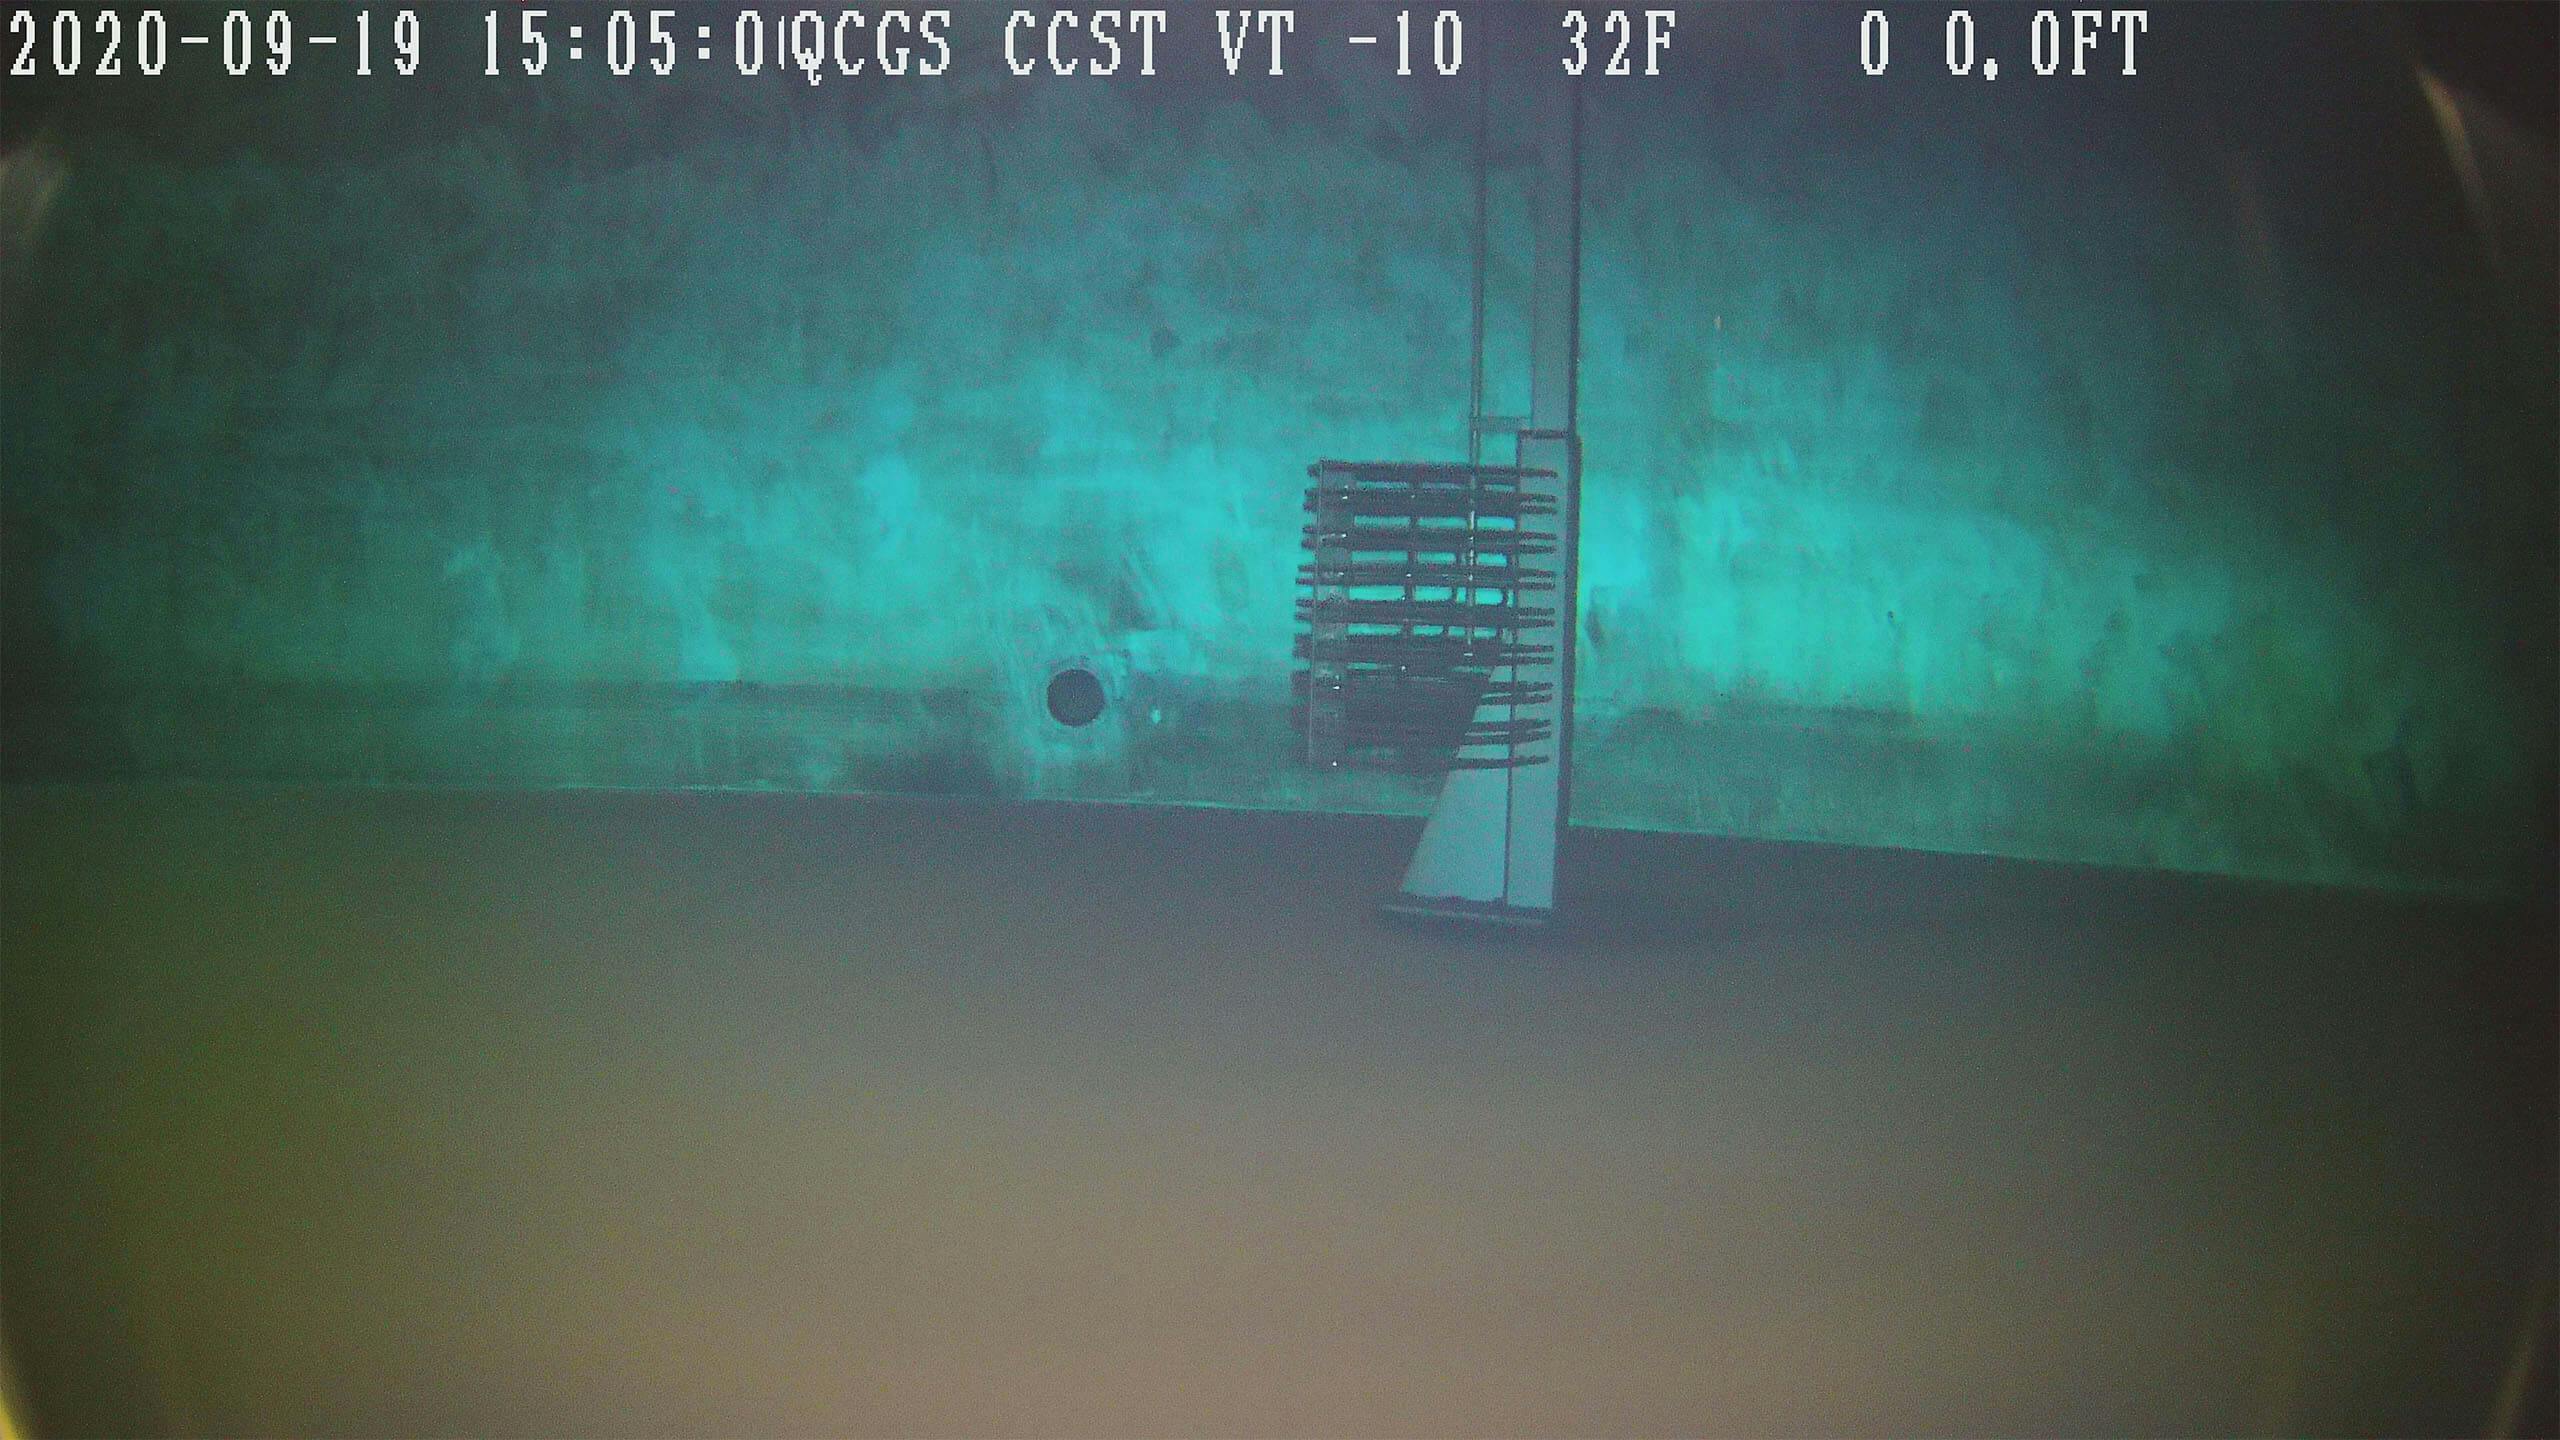 Underwater image taken with a DTG3 underwater ROV showing the inside of a blue water tank and silver ladder. 